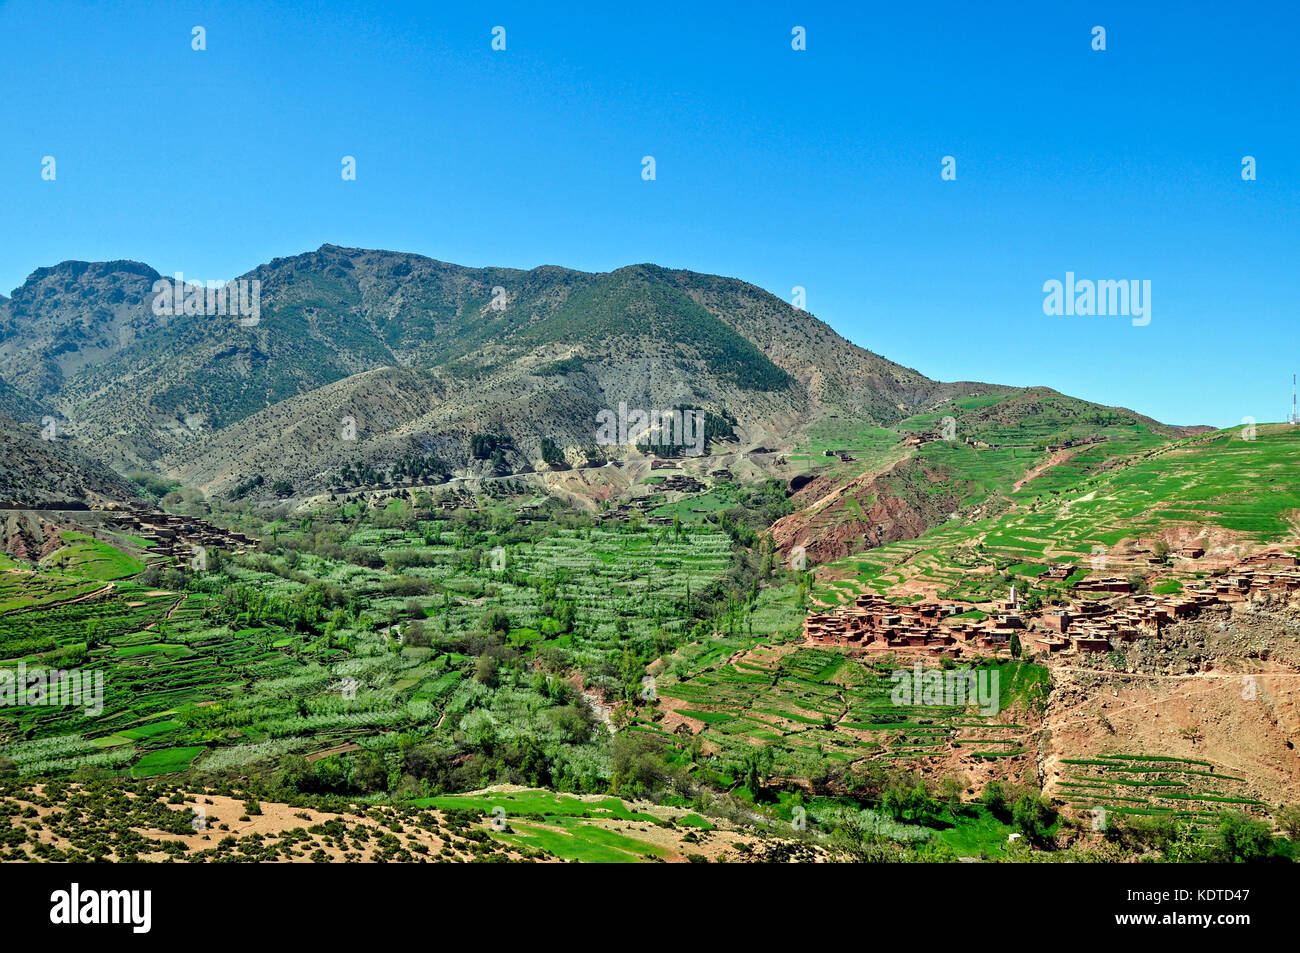 View of a Moroccan village in the High Atlas Mountains on a sunny day Stock Photo